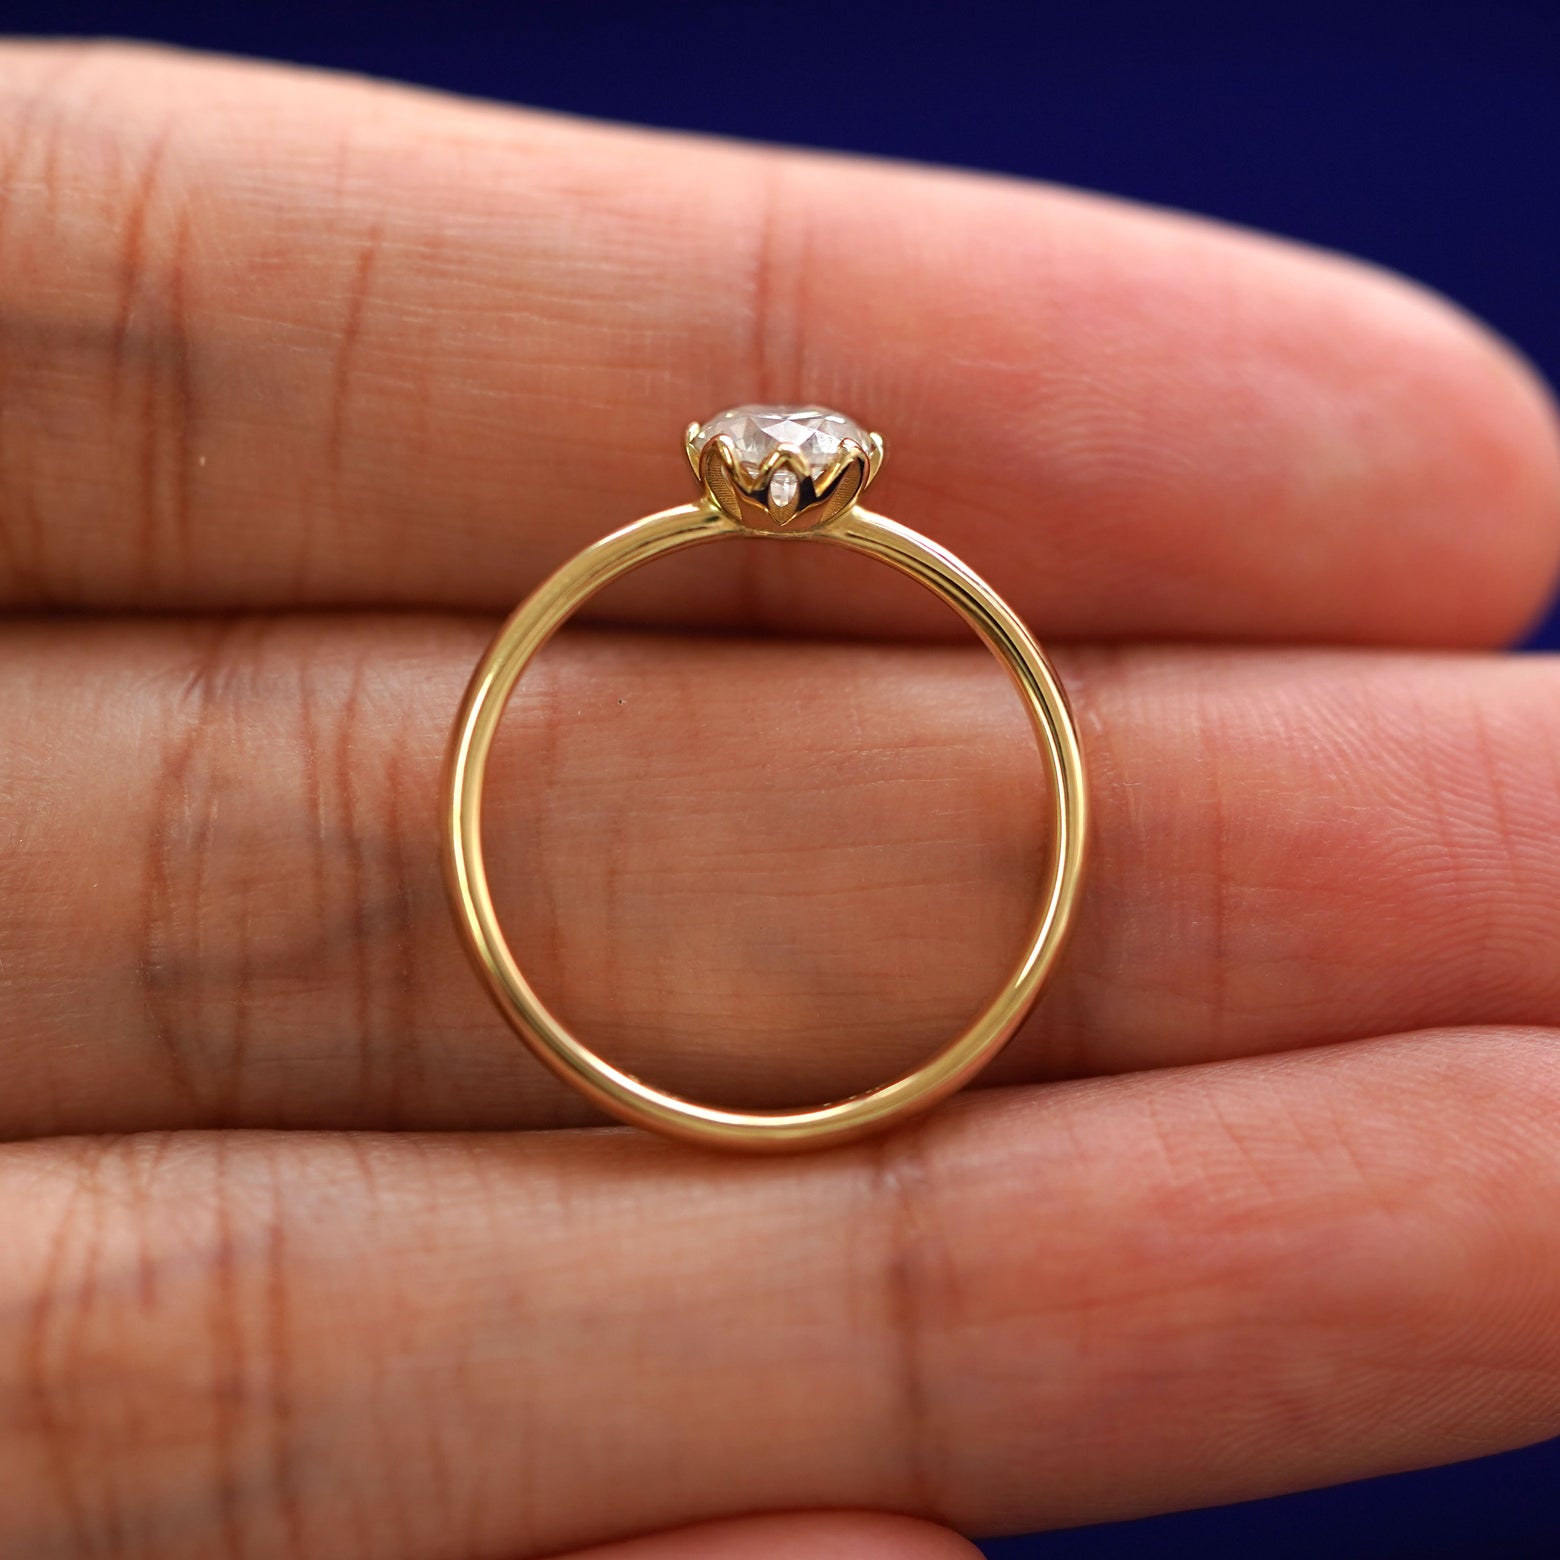 A yellow gold Diamond Petal Ring in a model's hand showing the thickness of the band